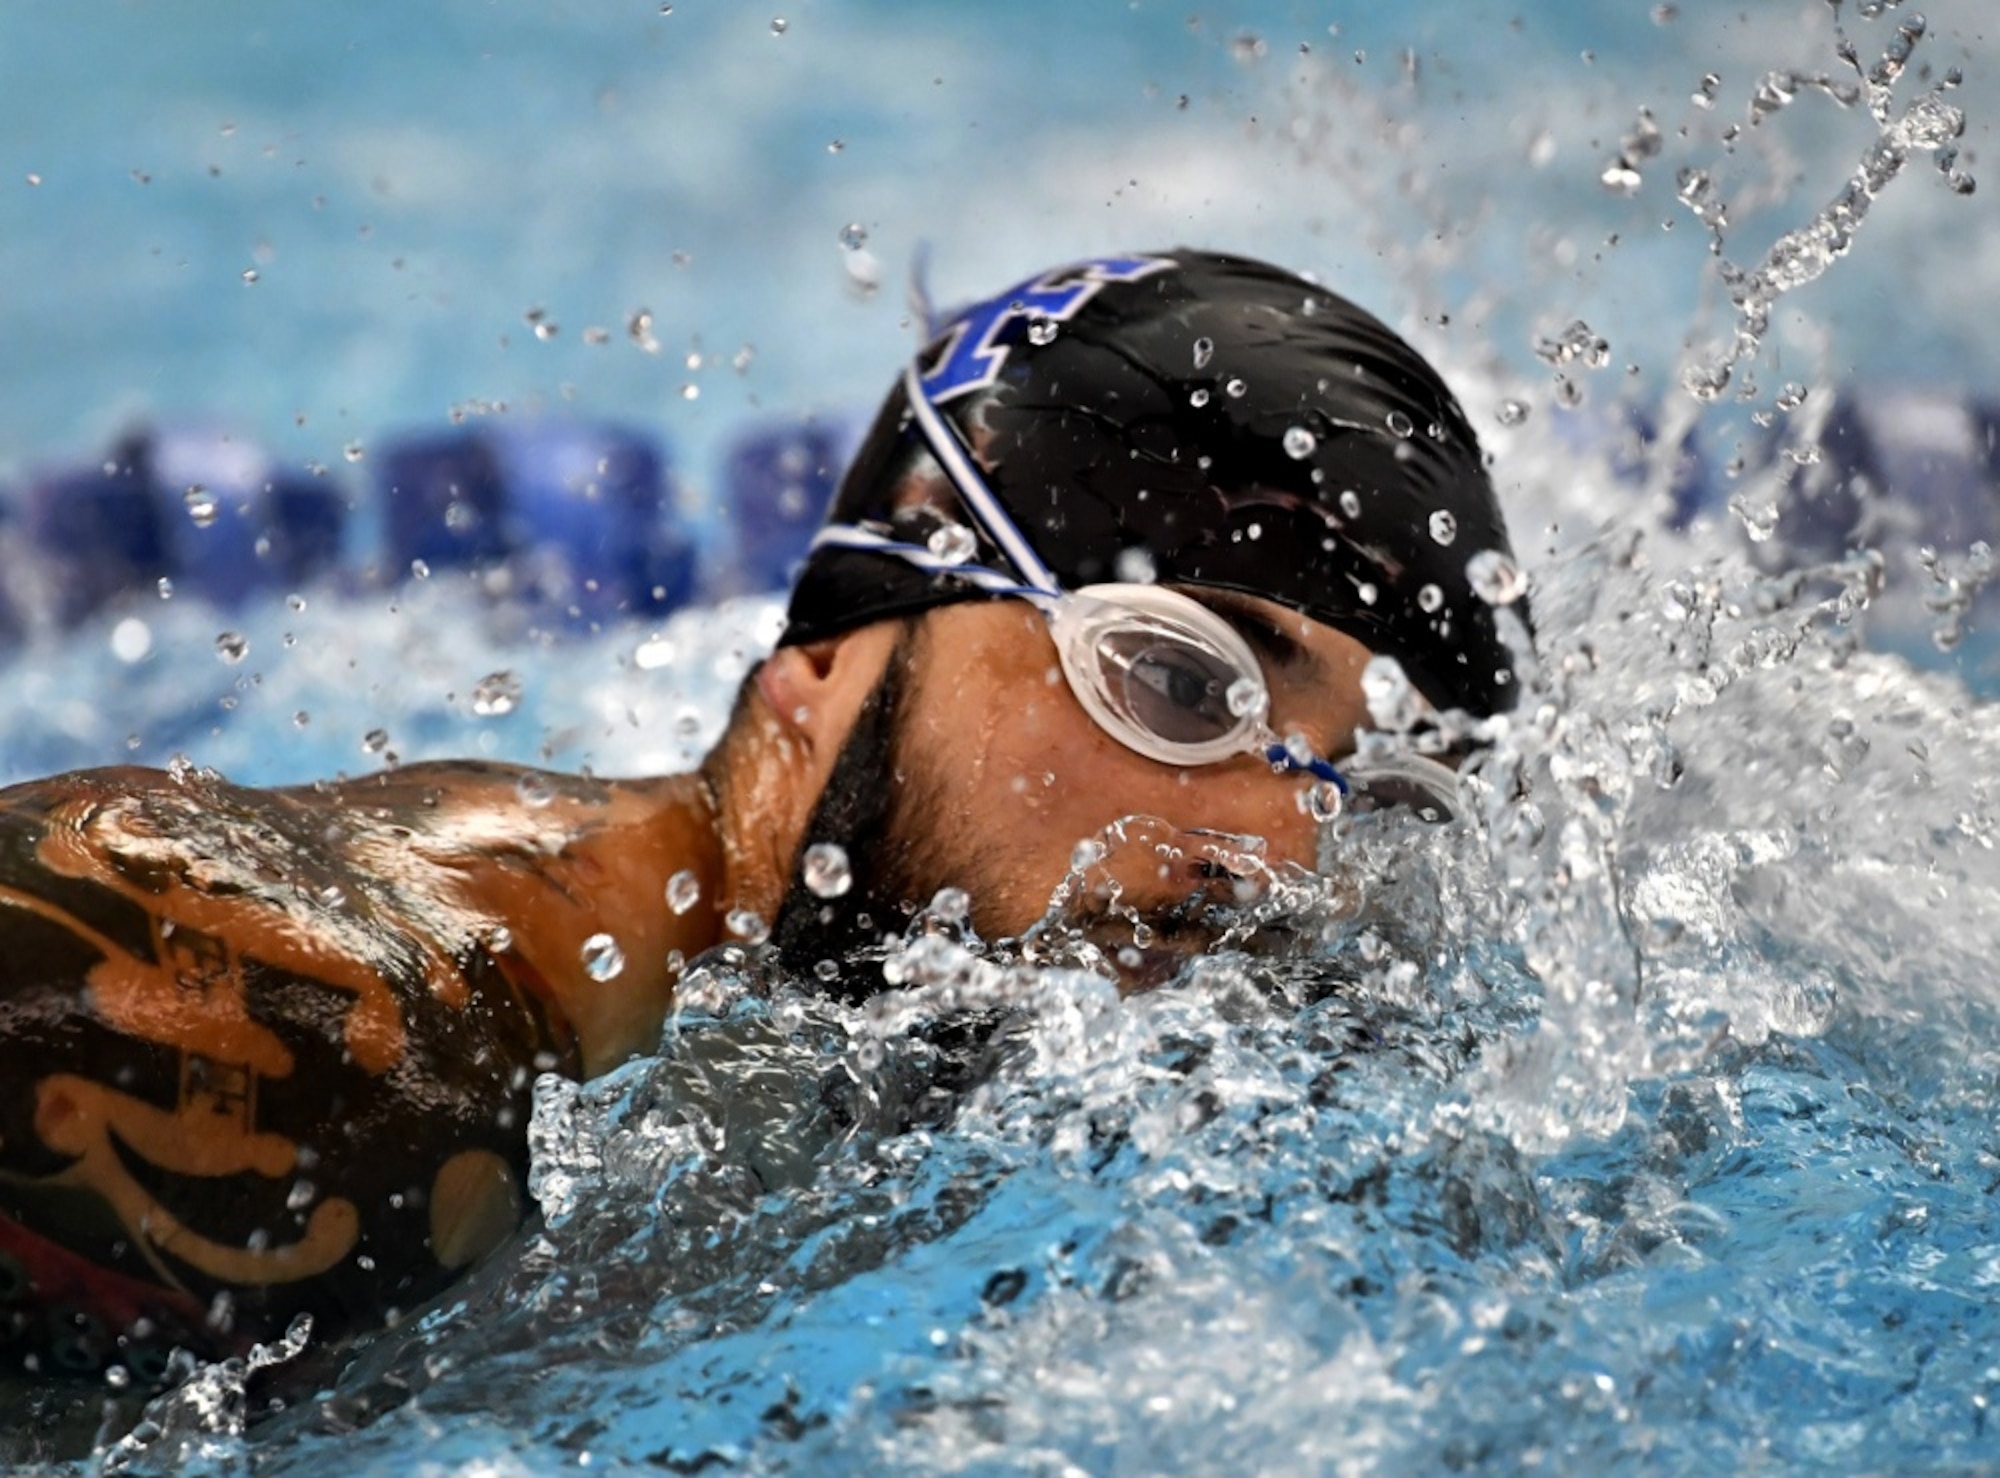 Team Air Force member Rafael Morfinenciso competes in the Department of Defense Warrior Games swimming competition at the U.S. Air Force Academy, Colorado Springs, Colo., June 7, 2018. There were 39 athletes representing Team Air Force at the Games, competing against wounded, ill and injured service members and veterans representing the U.S. Army, Marine Corps, Navy, and Special Operations Command, as well as athletes from the U.K. Armed Forces, Australian Defence Force and Canadian Armed Forces (U.S. Air Force photo by Staff Sgt. Rusty Frank)